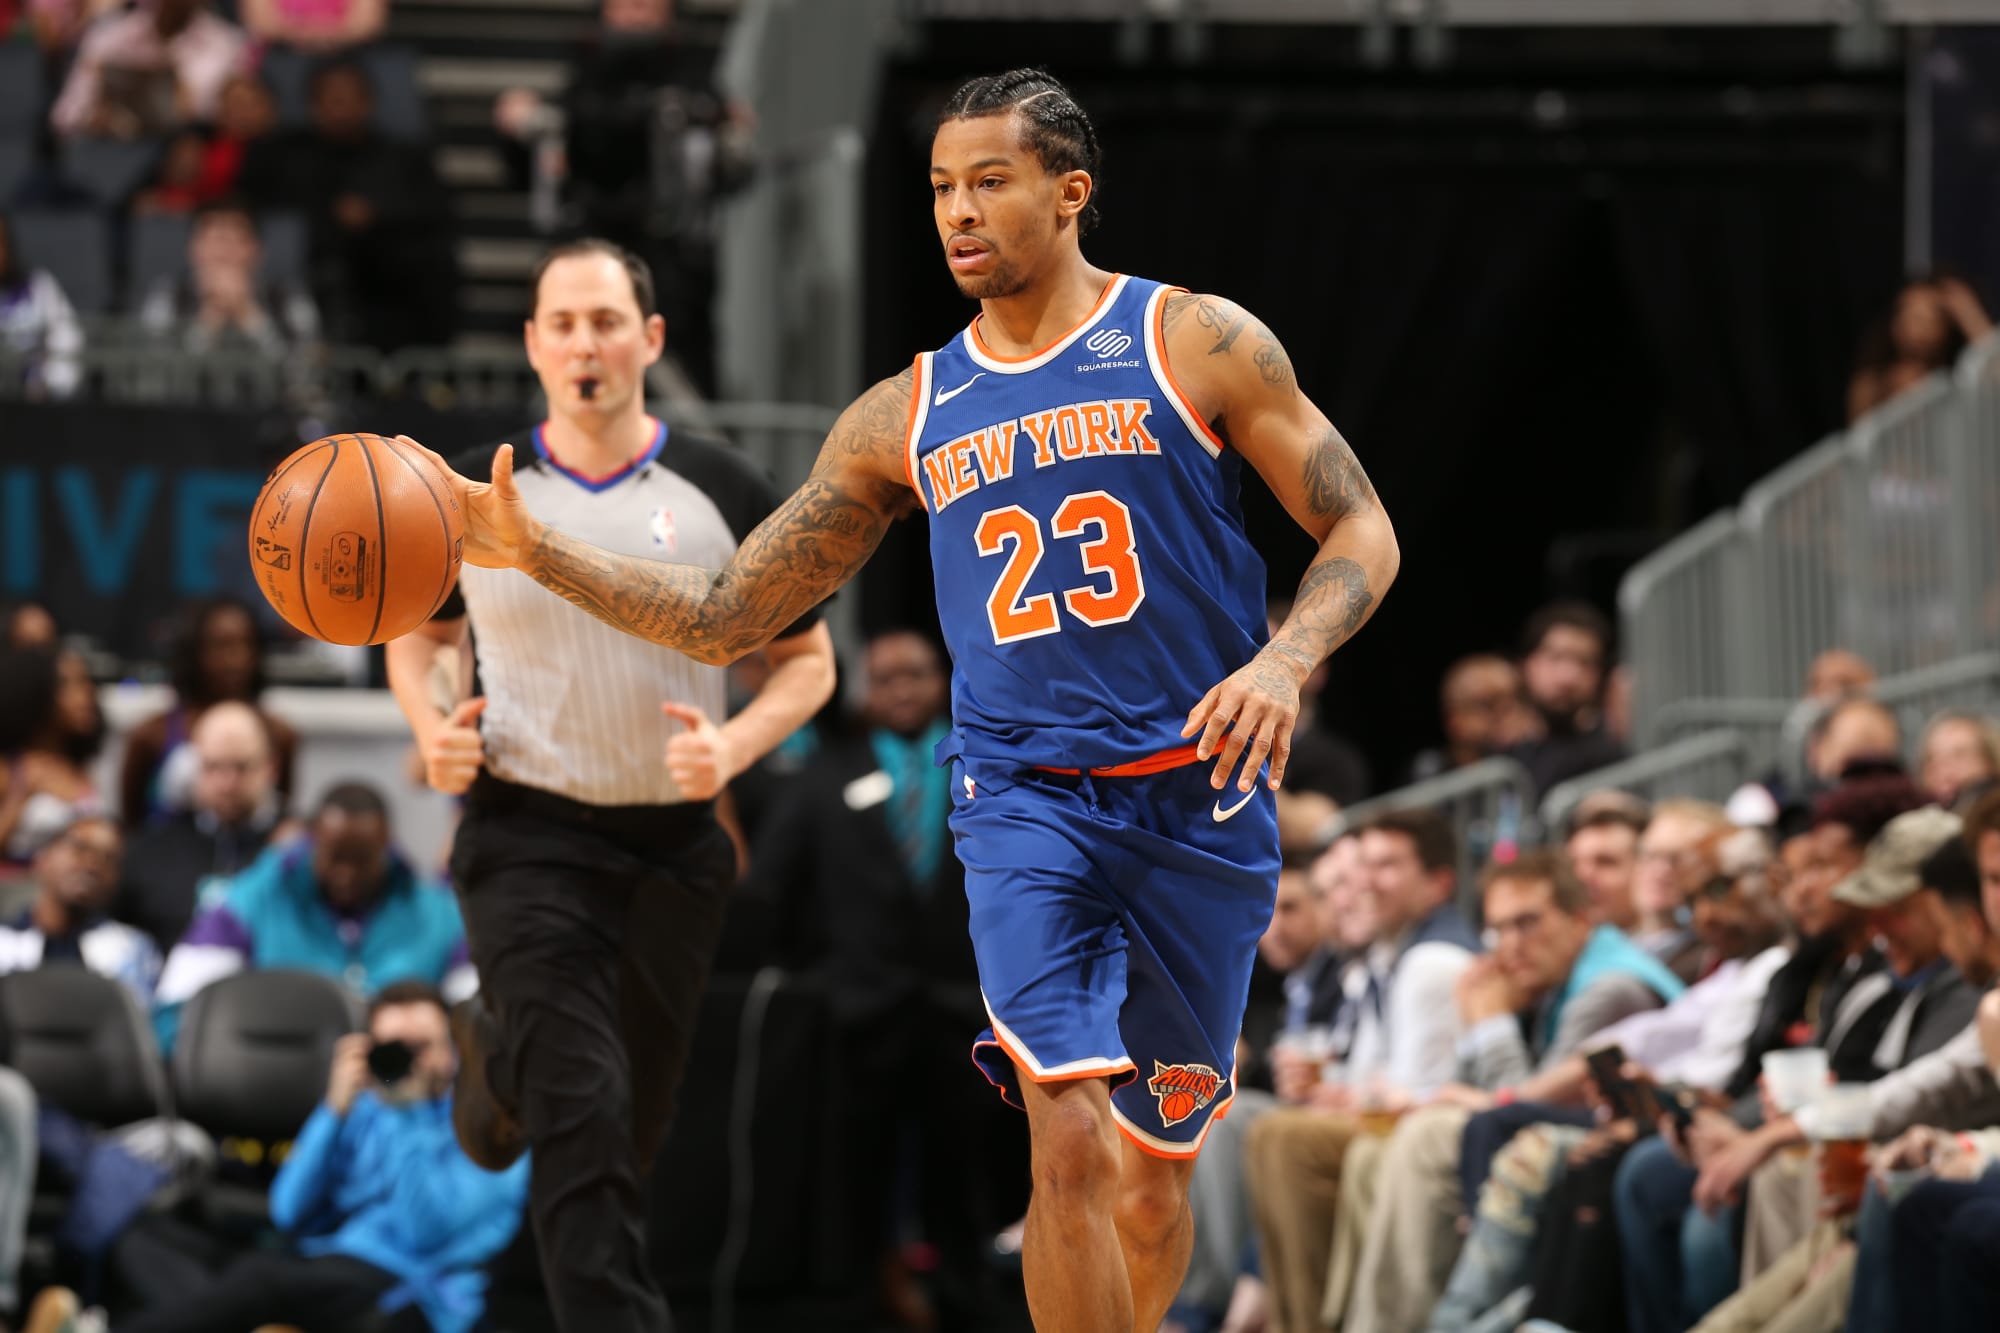 Is Trey Burke dropping “son” at the end of sentences now? 😂That NY swag  rubbing off 🔊🆙 to hear the guys talk about their New York firsts, By  New York Knicks